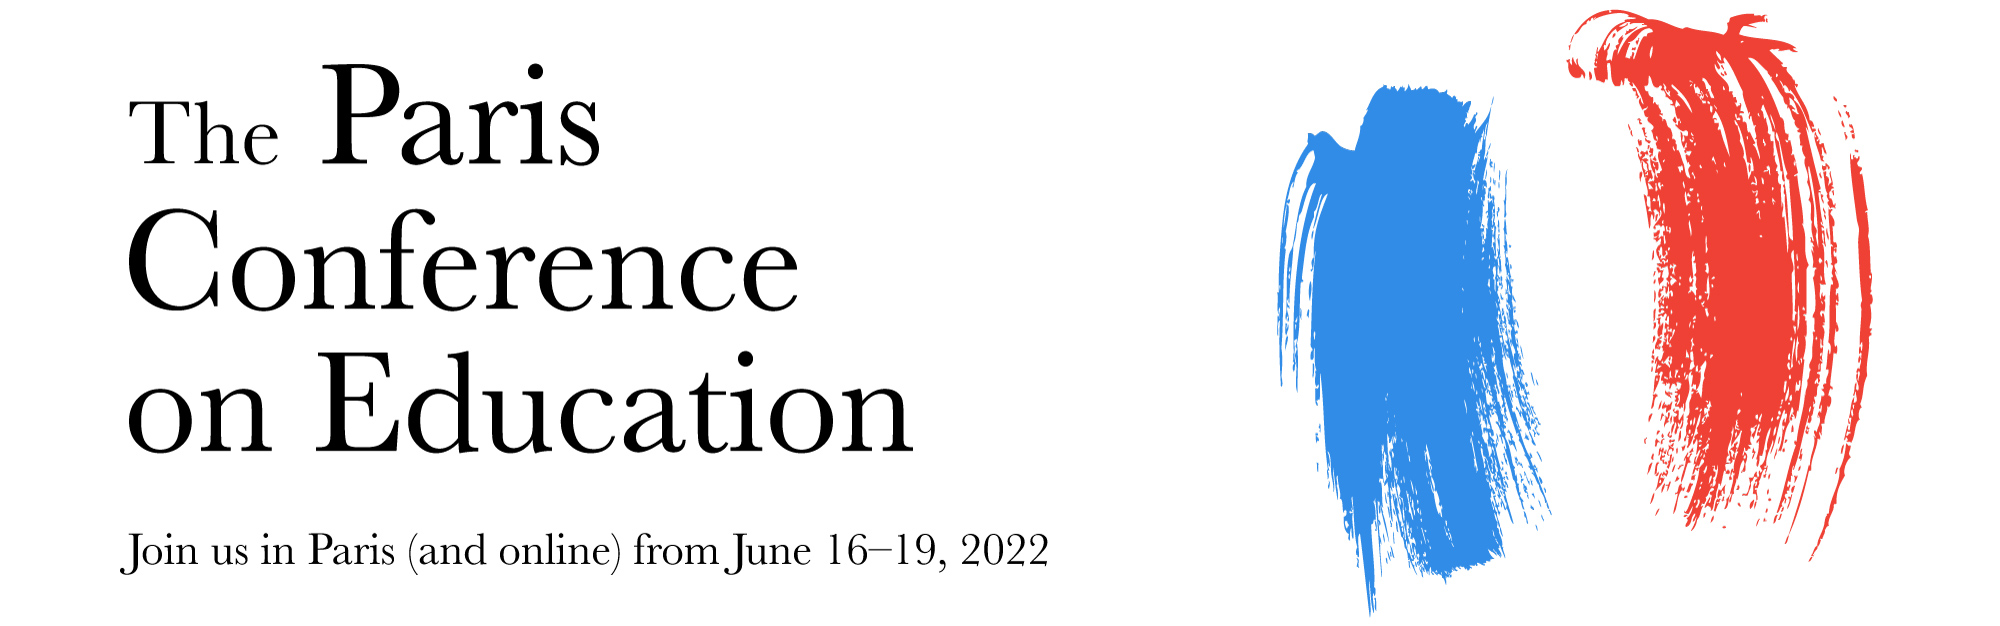 The-Paris-Conference-on-Education-PCE2022-Logo